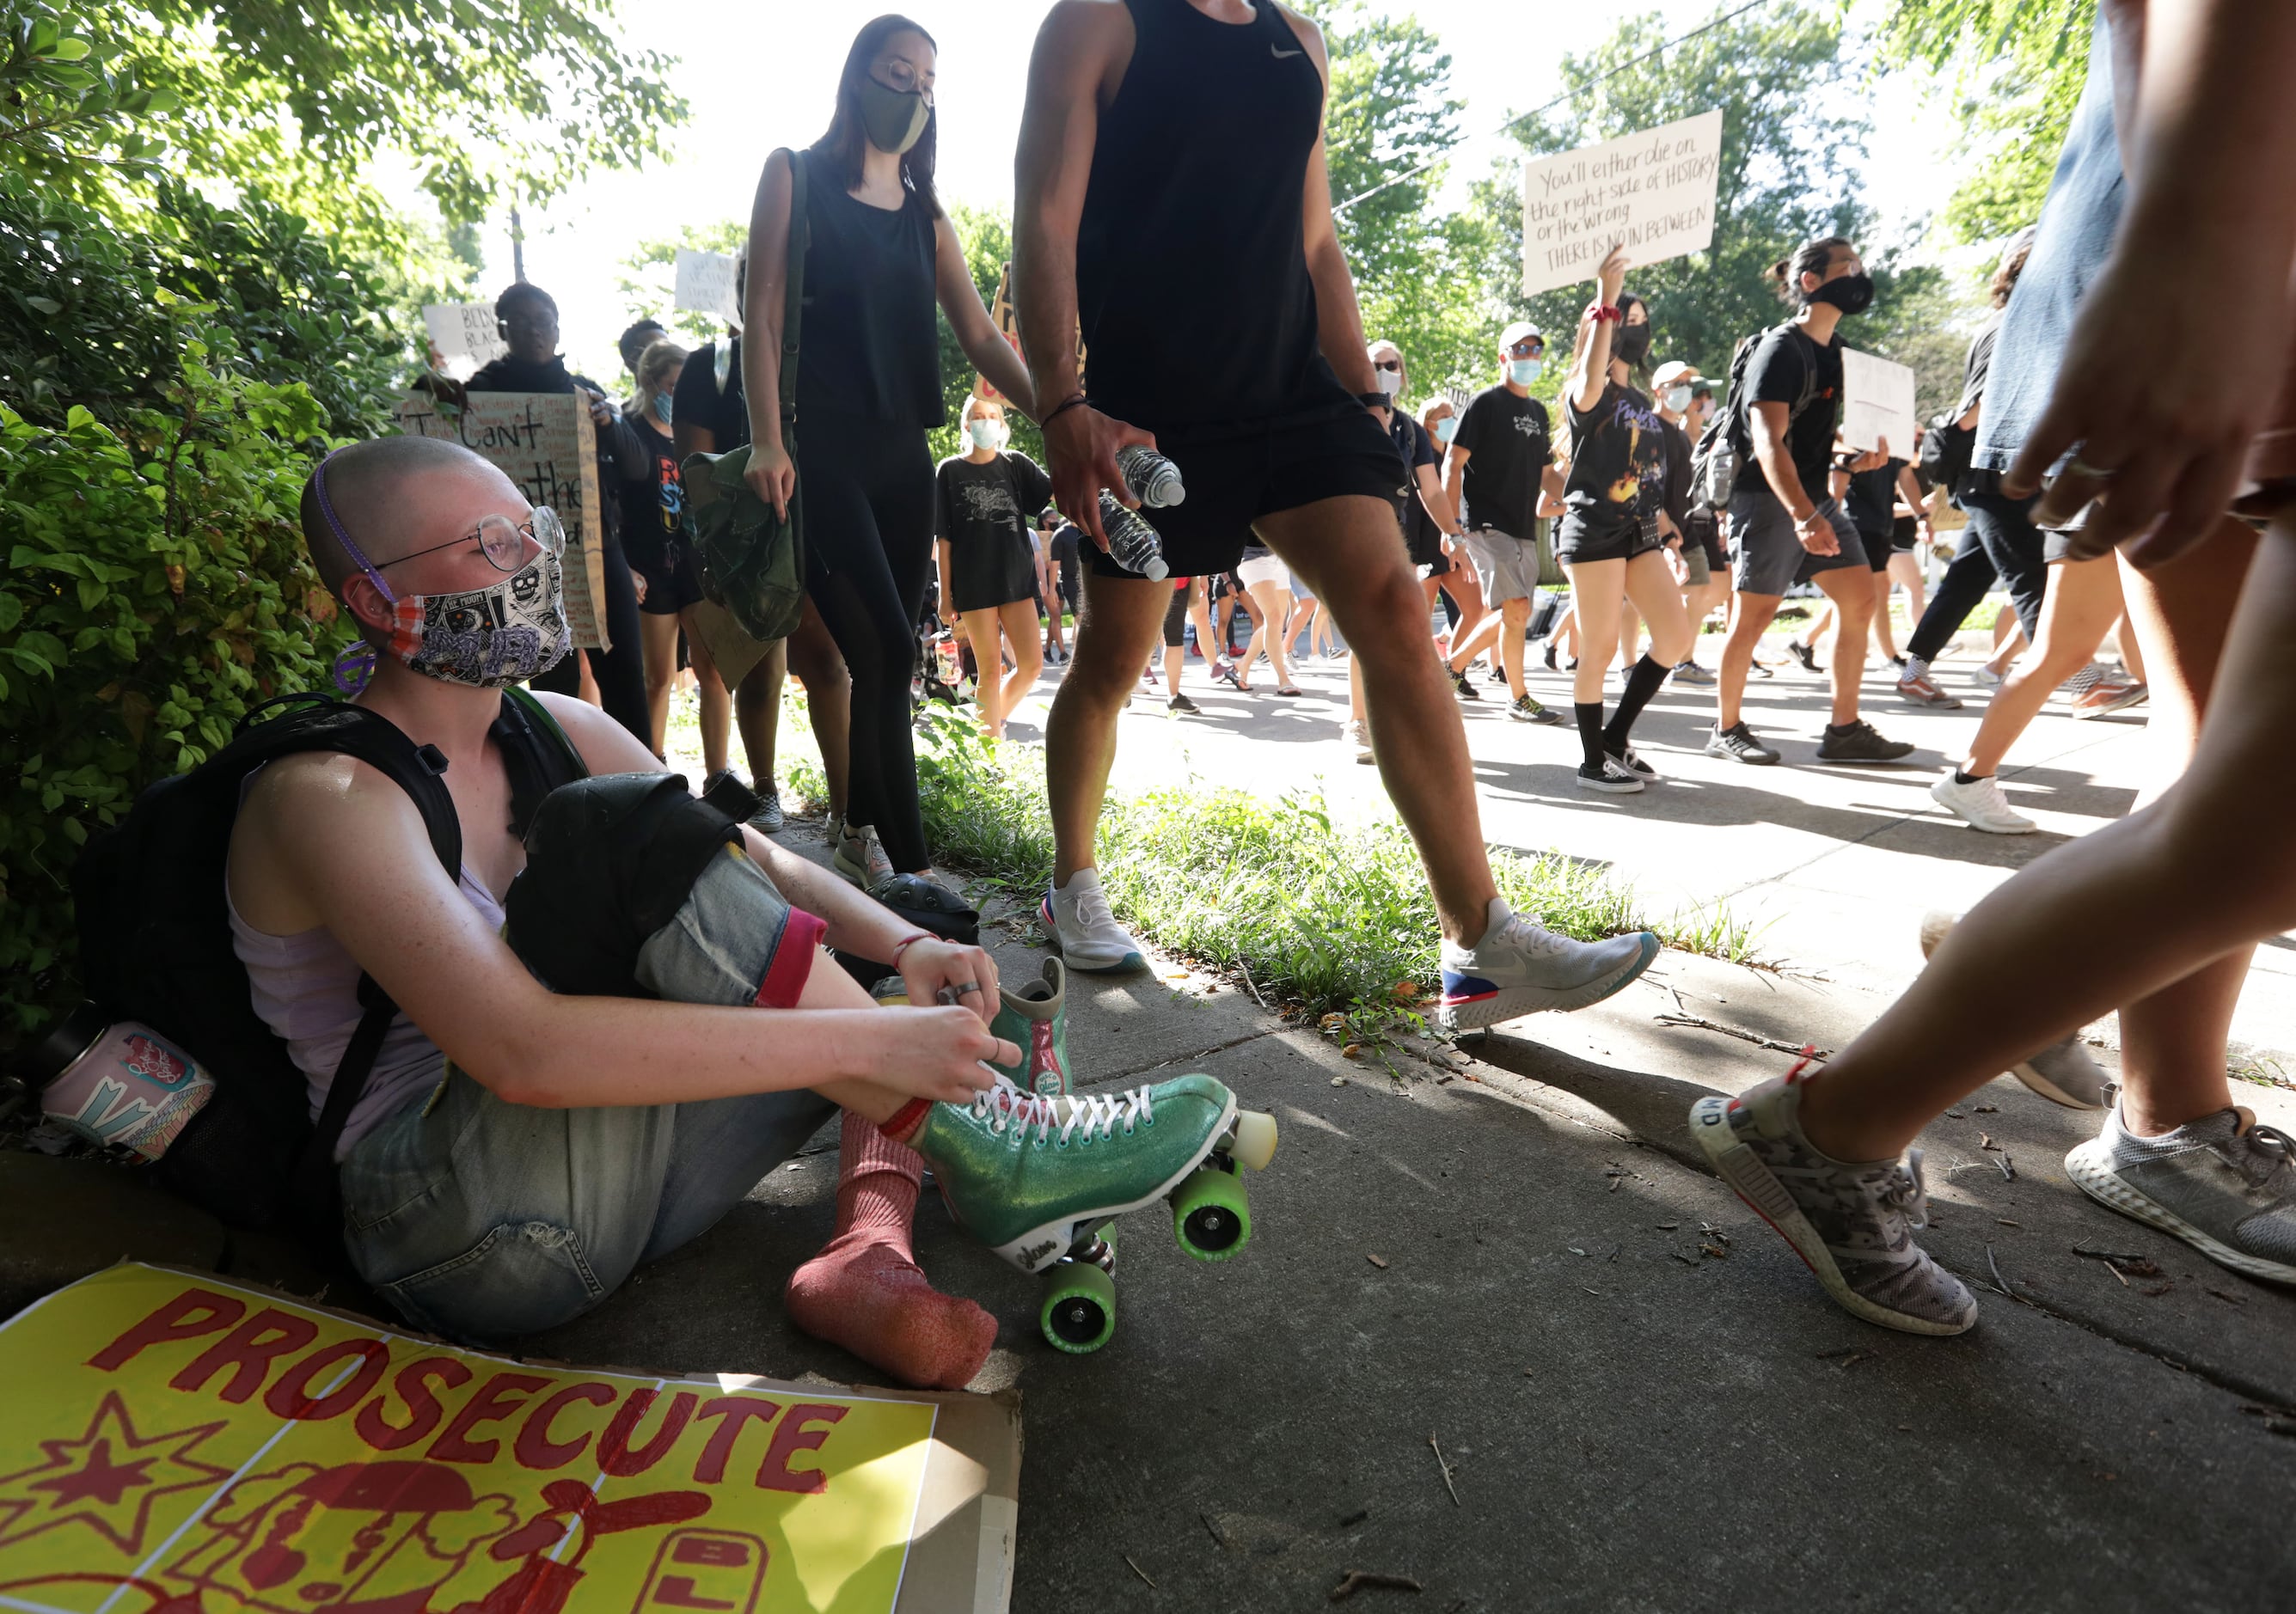 Helen Carter Flanagan, right, adjusts her rollerskates as protestors march down the streets...